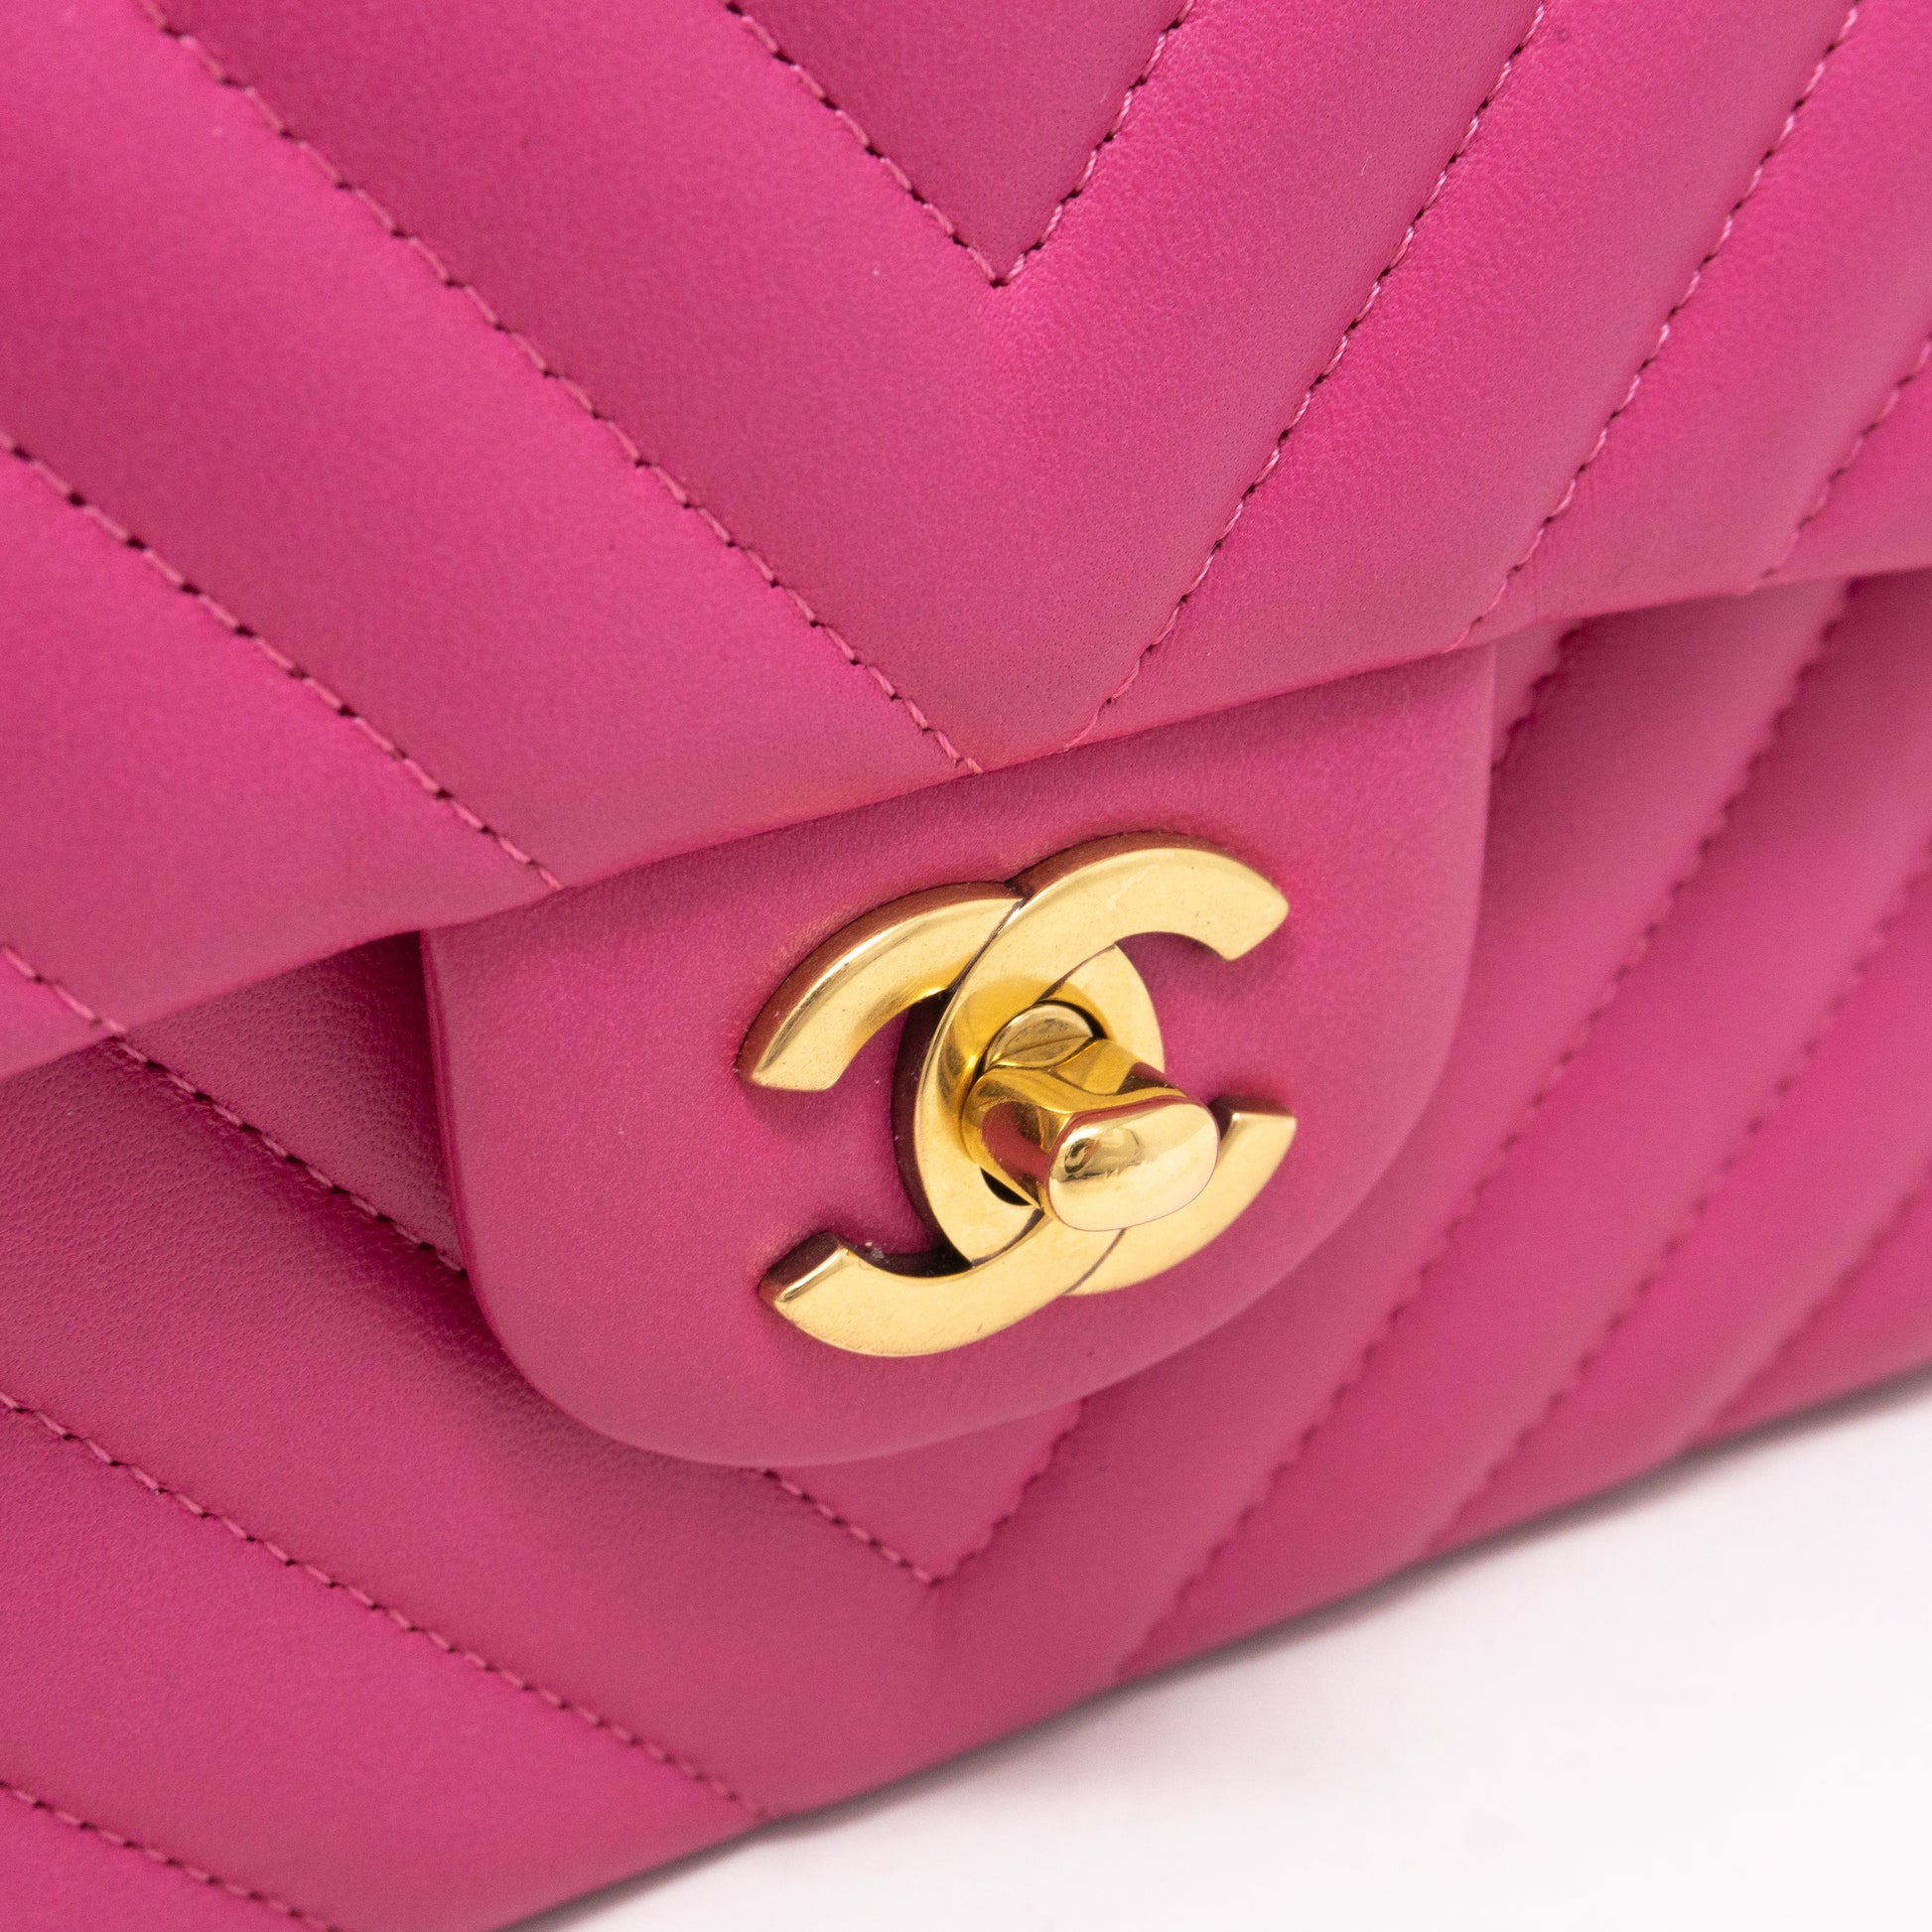 Chanel Pink Quilted Satin Classic Double Flap Medium Q6B0102KP0001